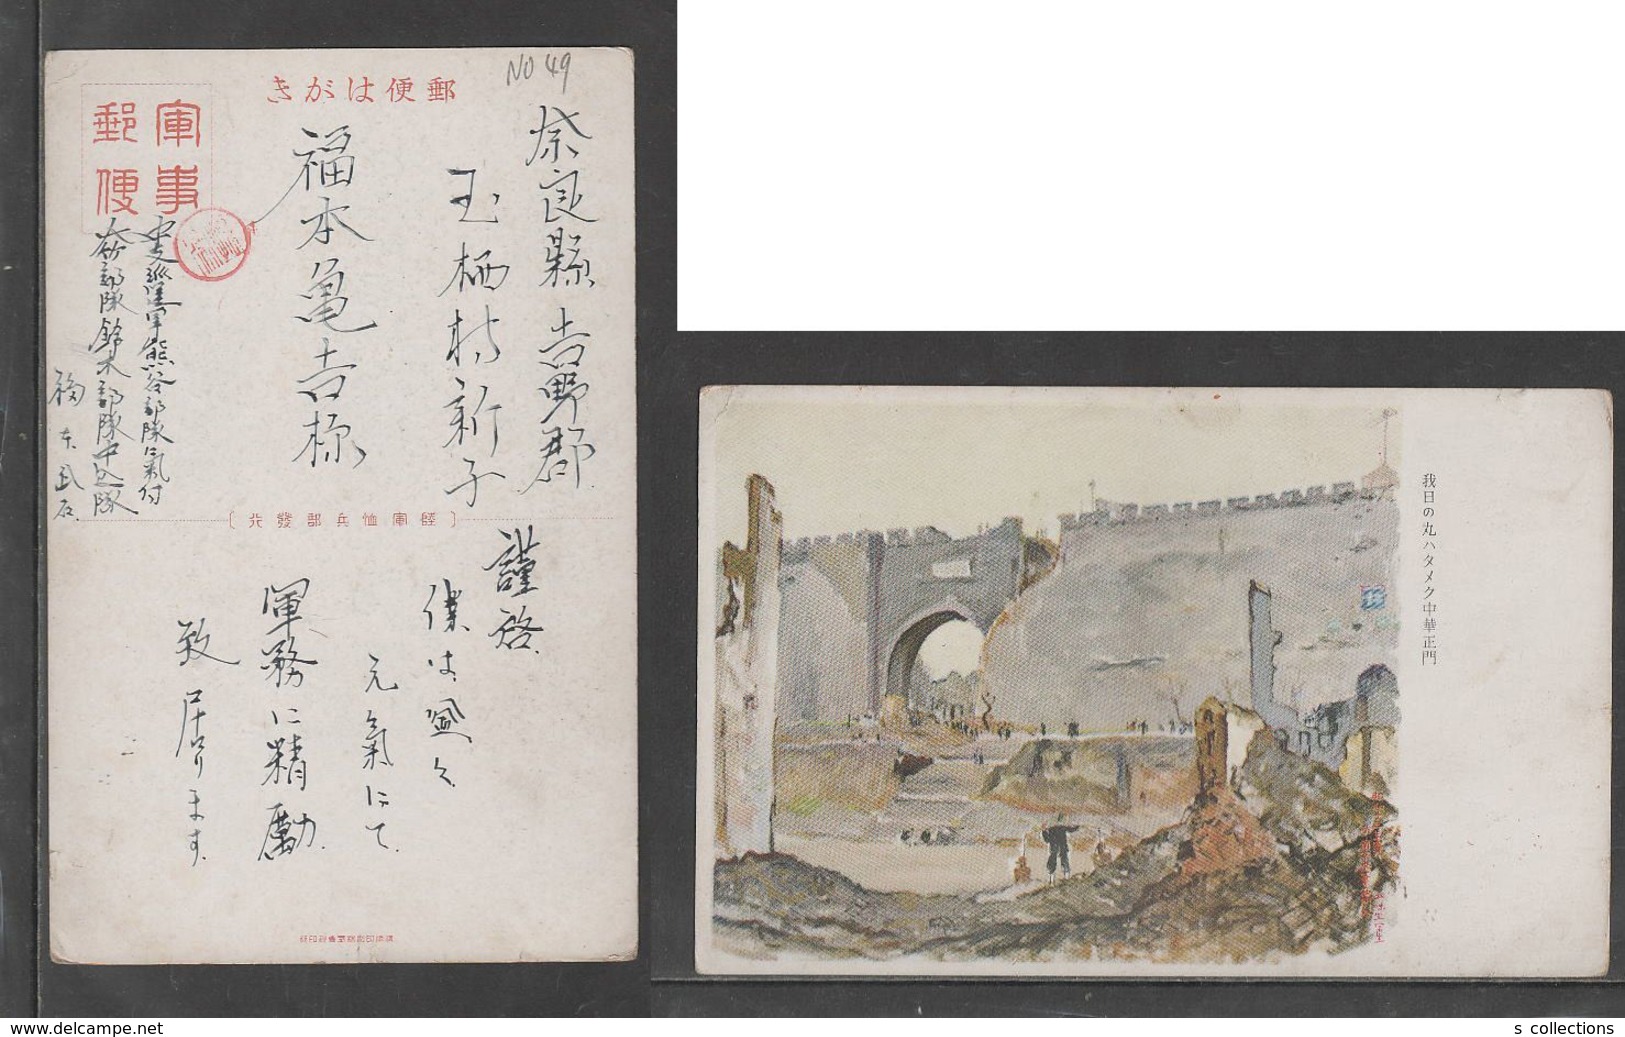 JAPAN WWII Military Nanjing China Gate Picture Postcard CENTRAL CHINA WW2 MANCHURIA CHINE MANDCHOUKOUO JAPON GIAPPONE - 1943-45 Shanghái & Nankín